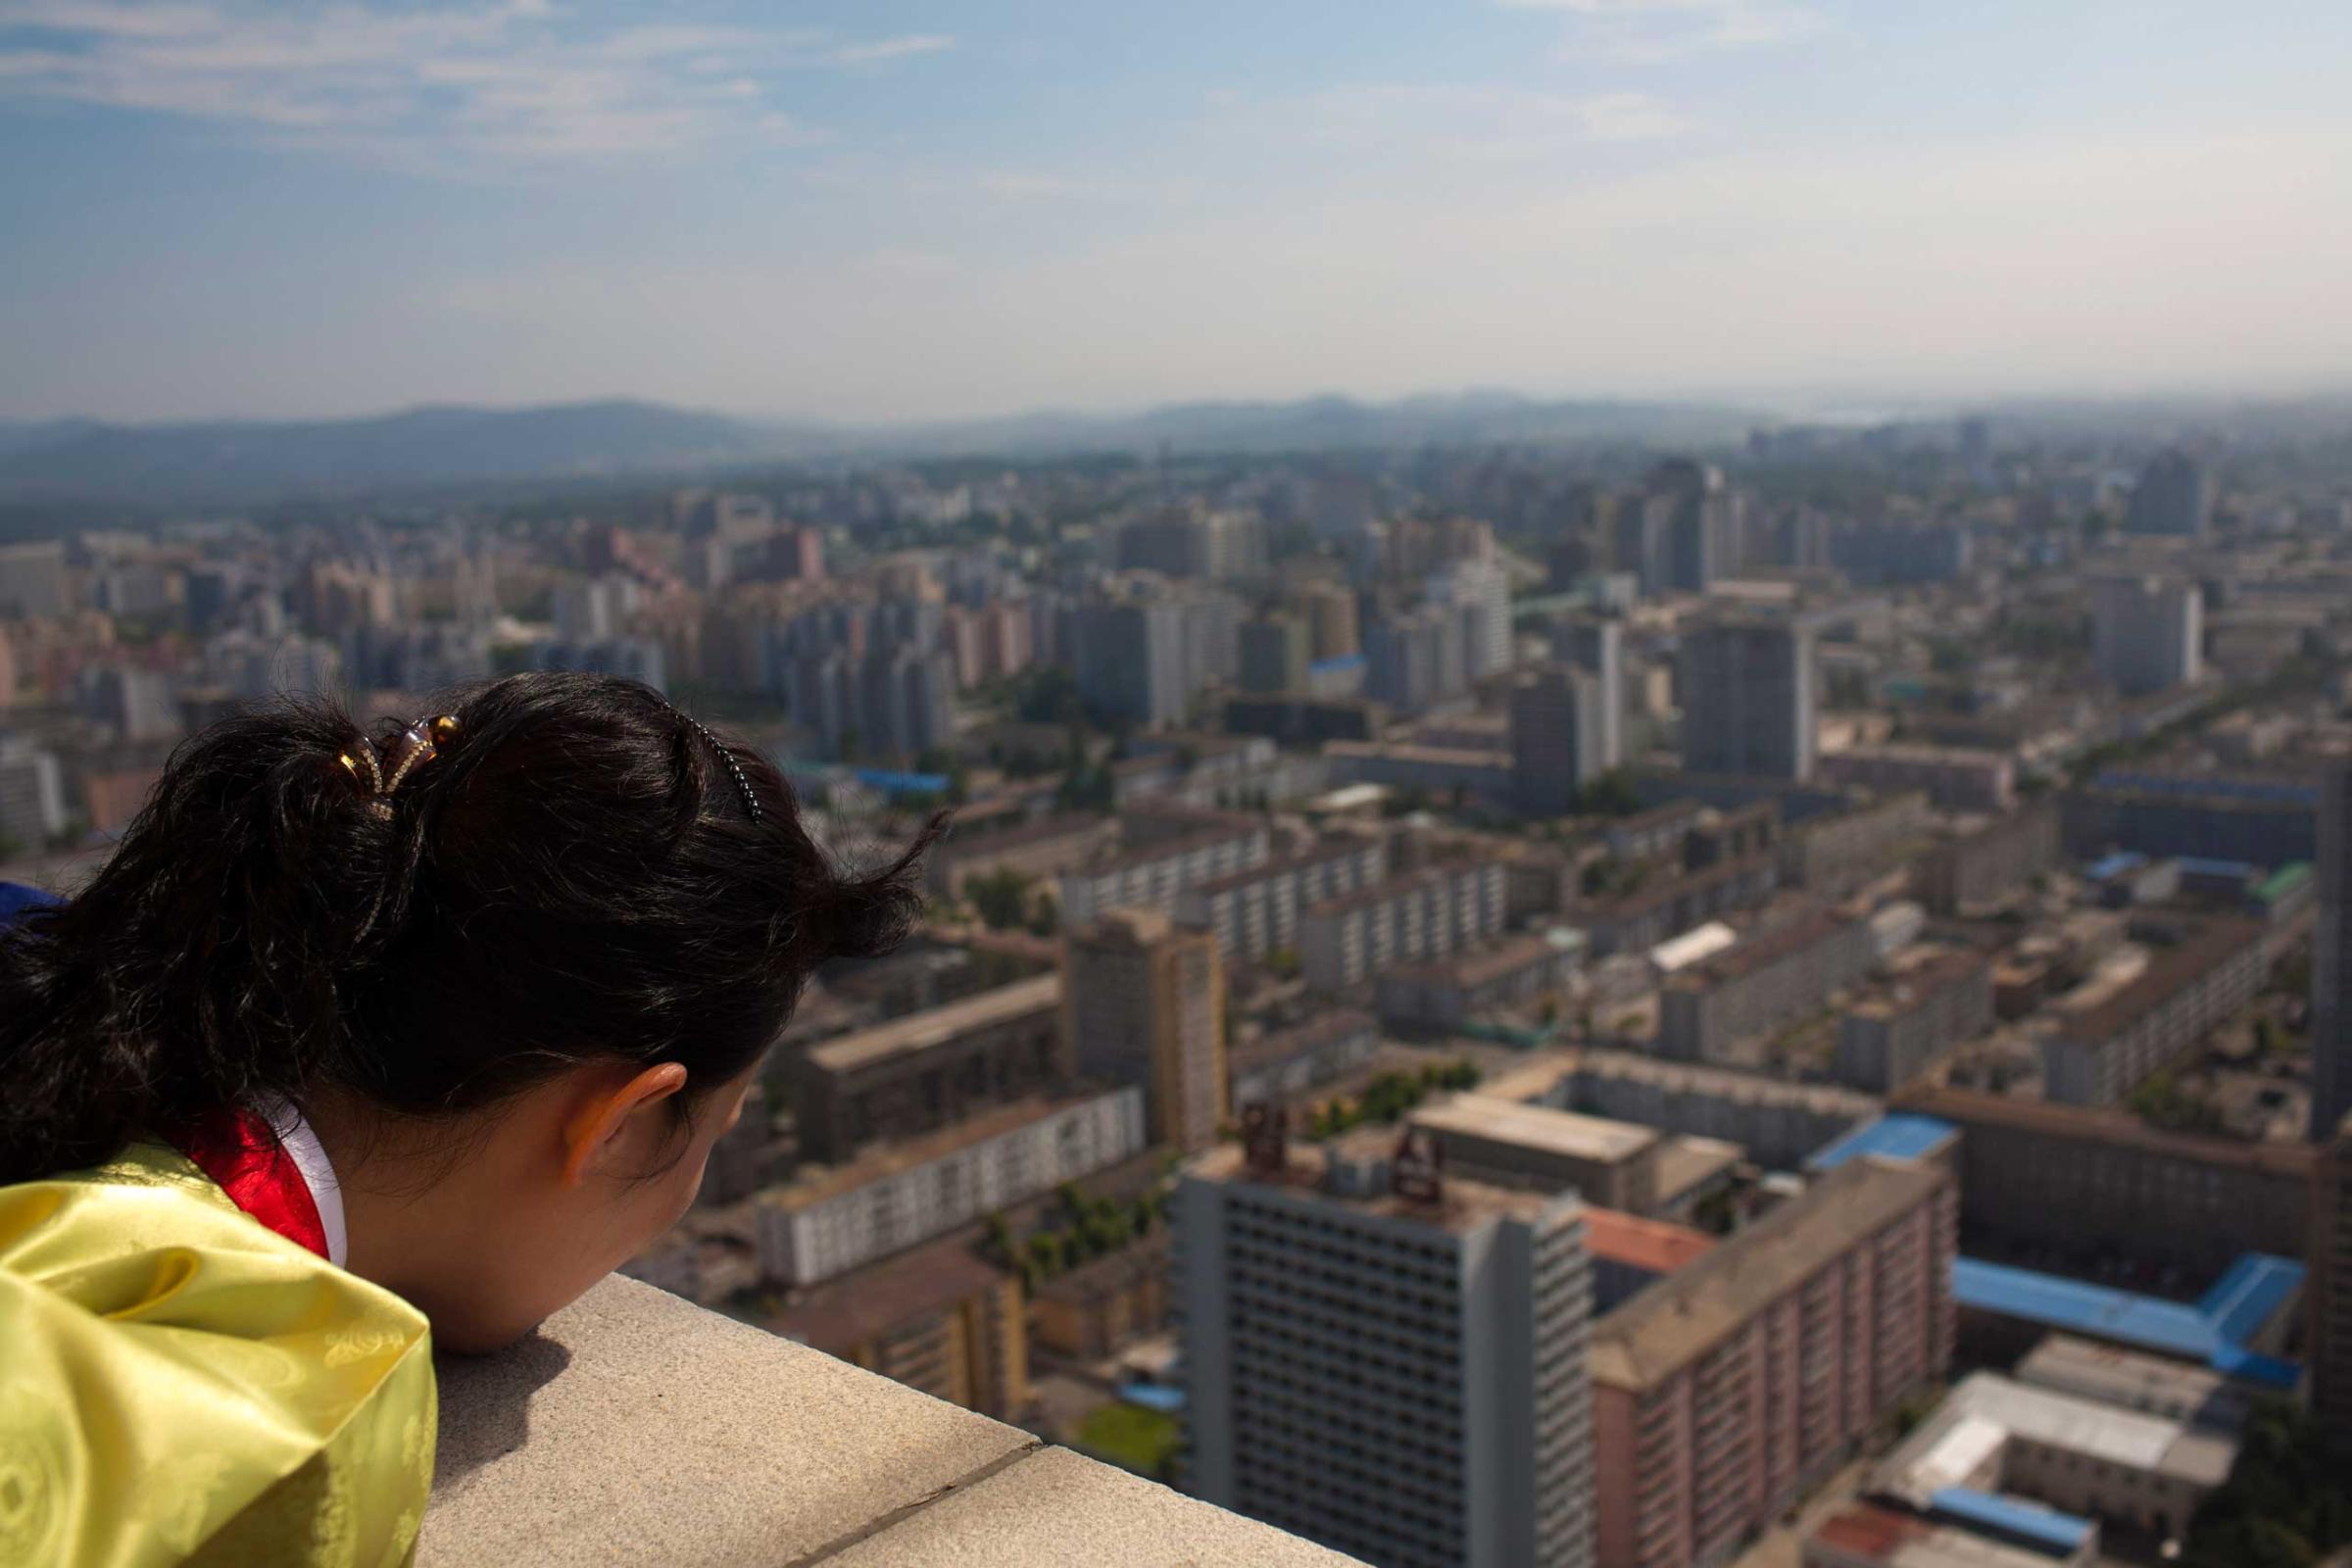 Aug. 26, 2011. A North Korean woman looks down at the city of Pyongyang from the top of the Tower of the Juche Idea.